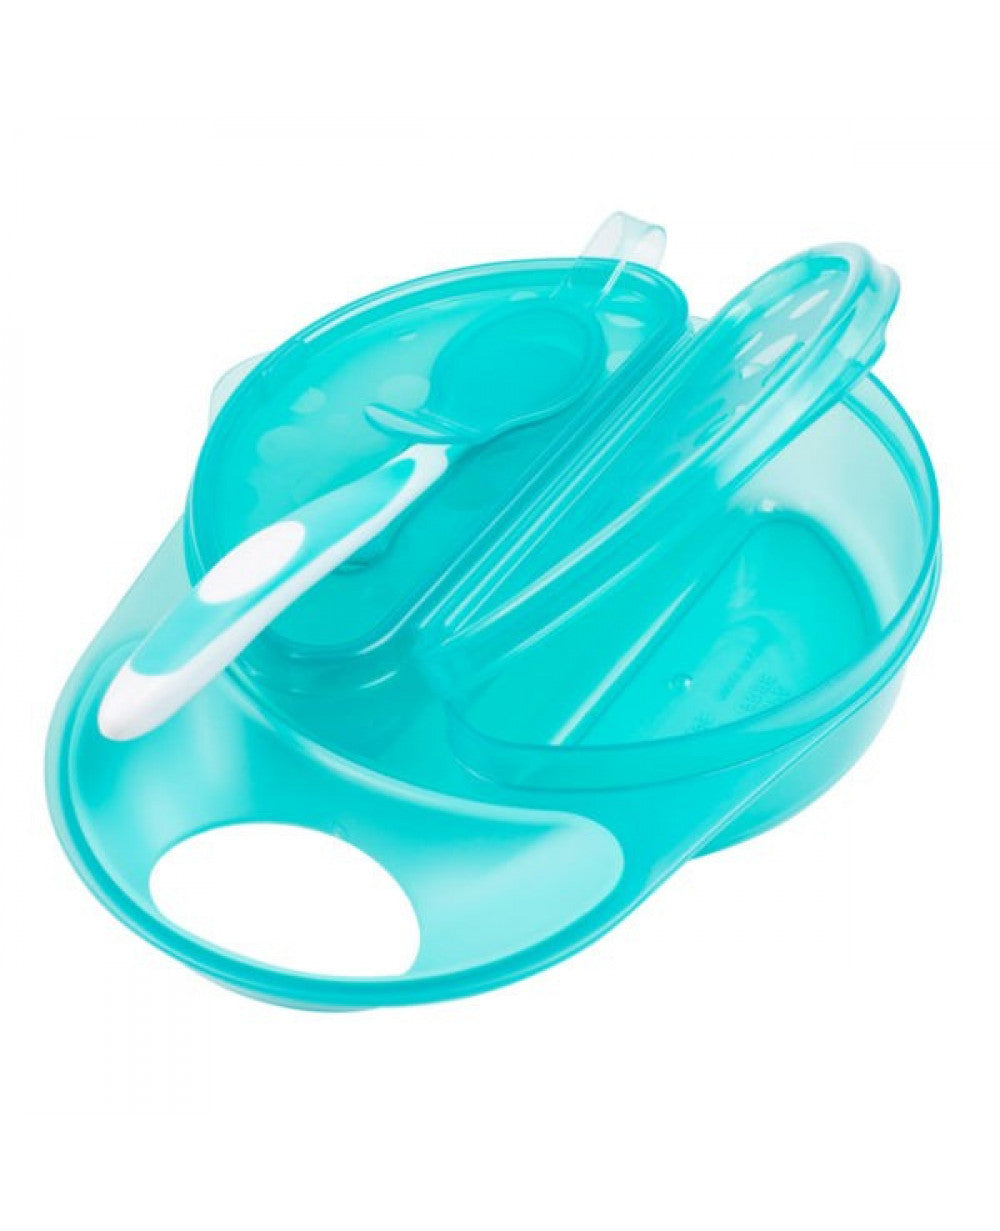 Dr. Brown's Travel Fresh Bowl and Spoon 1-Pack